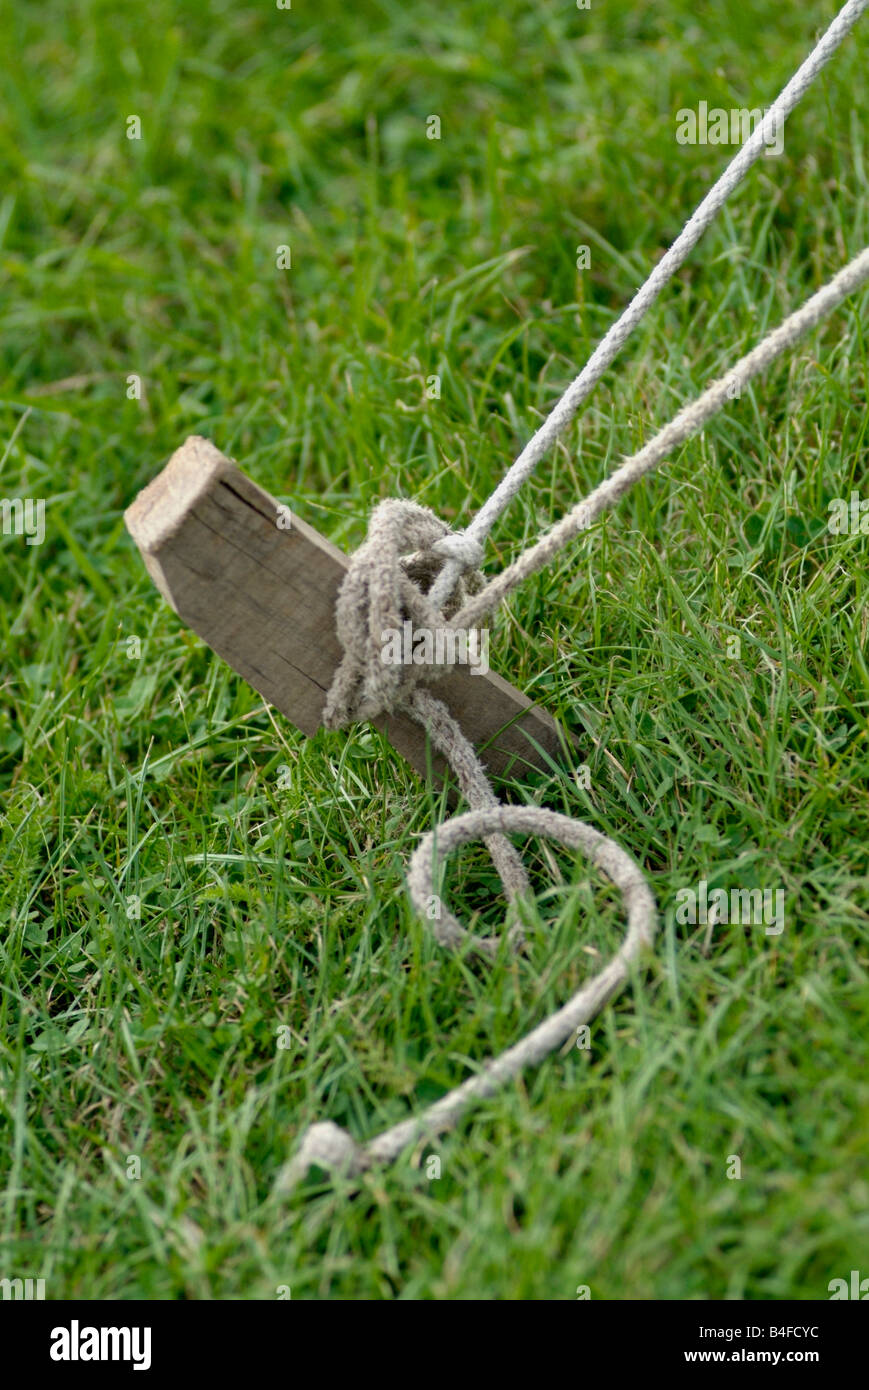 wooden home made tent peg and guy rope Stock Photo - Alamy